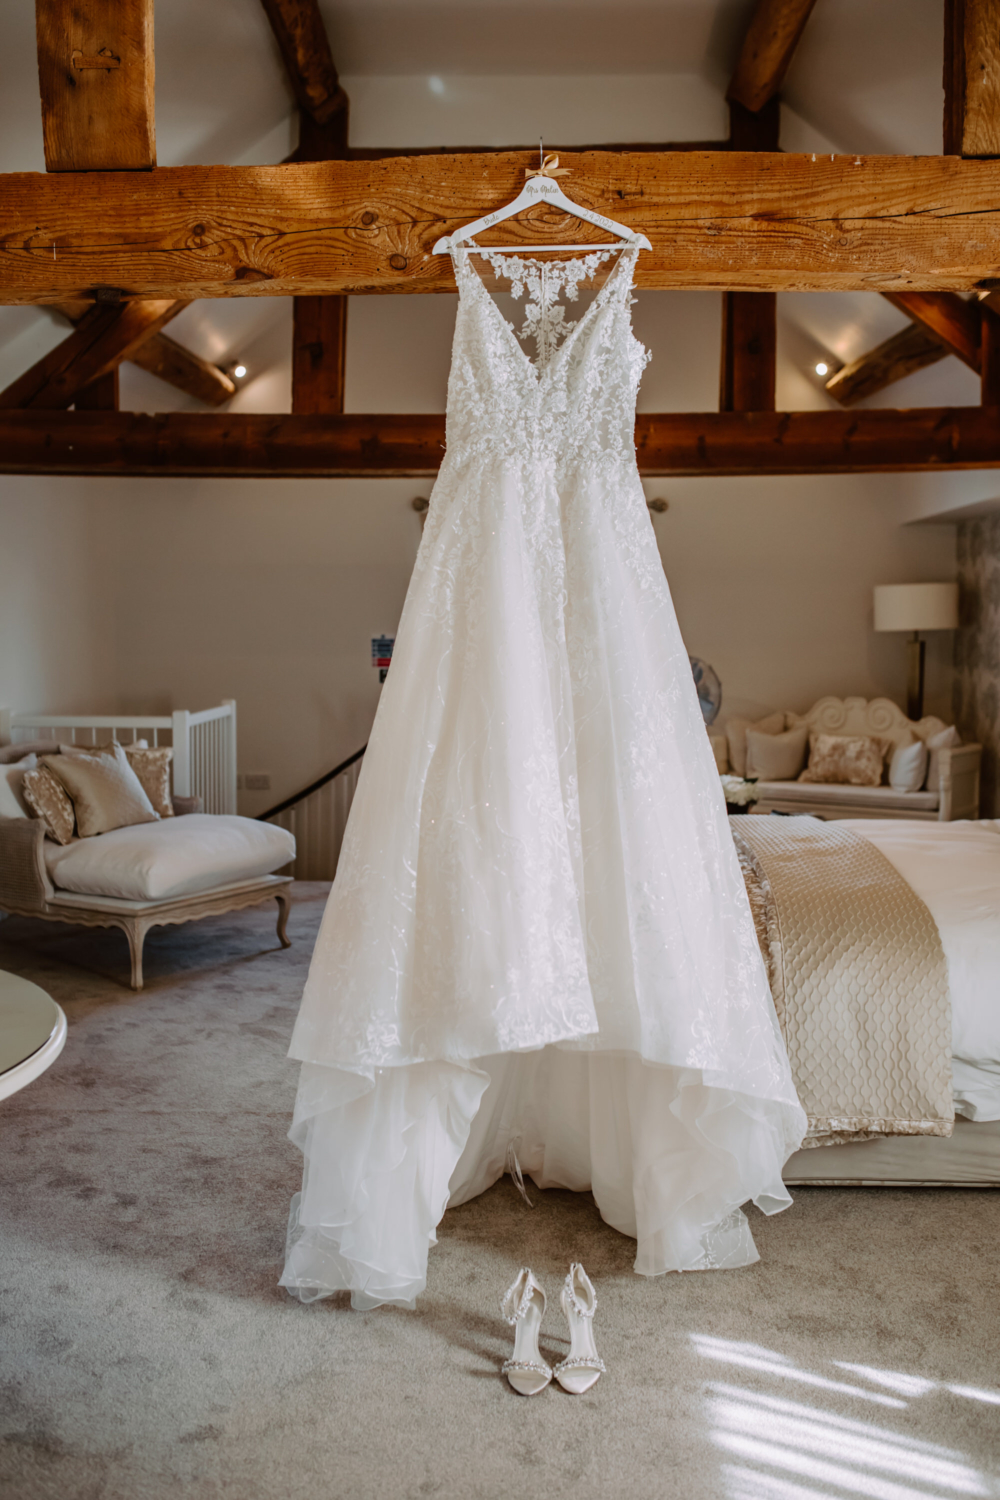 Wedding dress hanging from the beam in bridal suite 